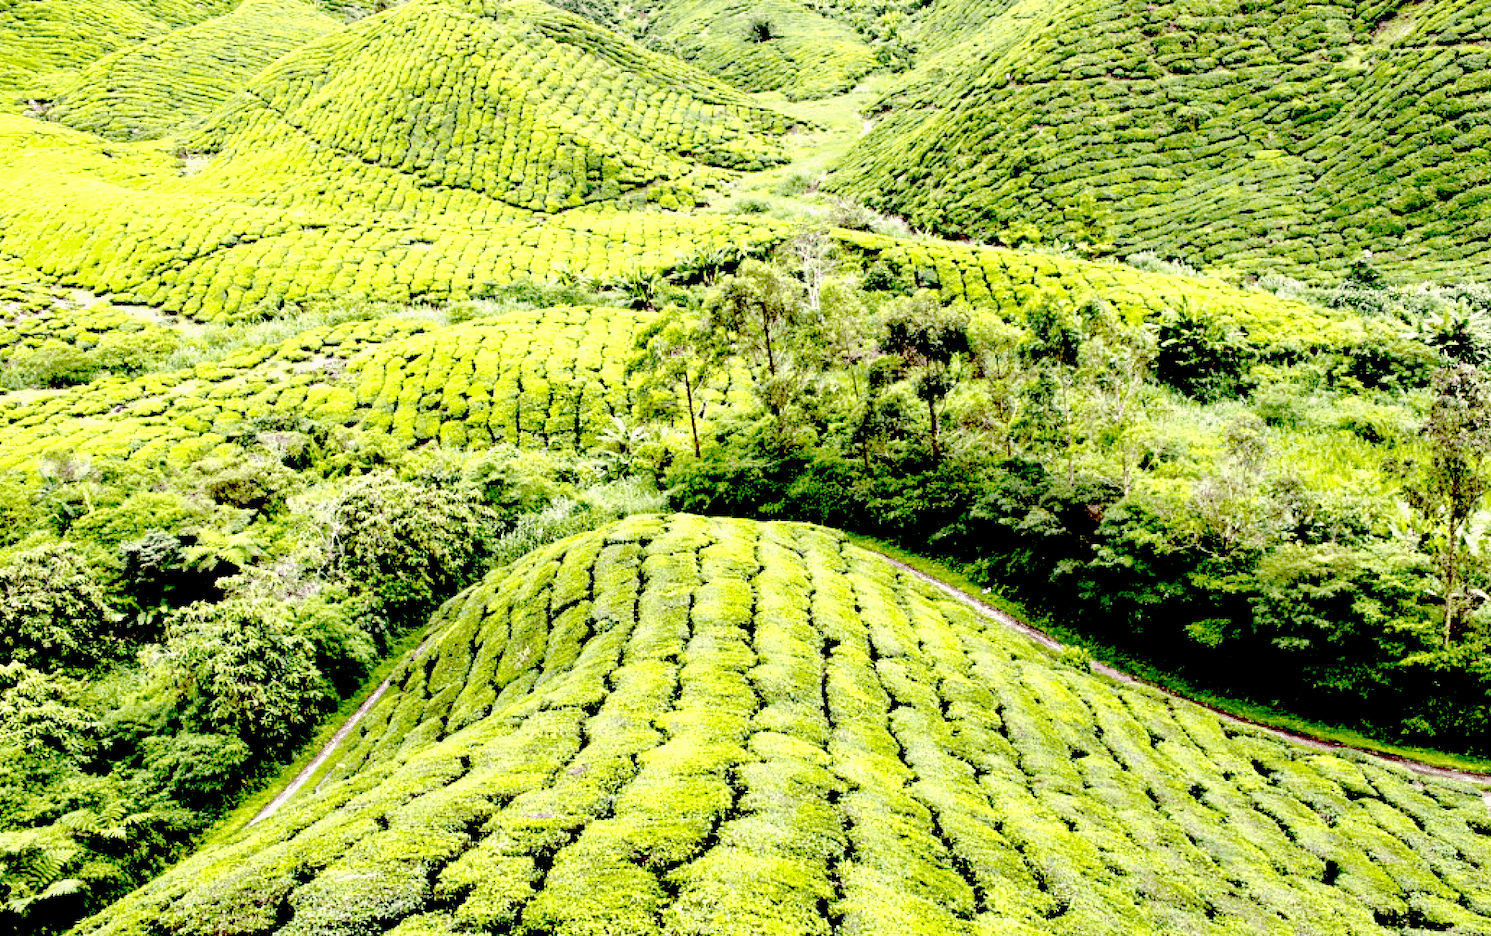 Places to Visit in Cameron Highlands